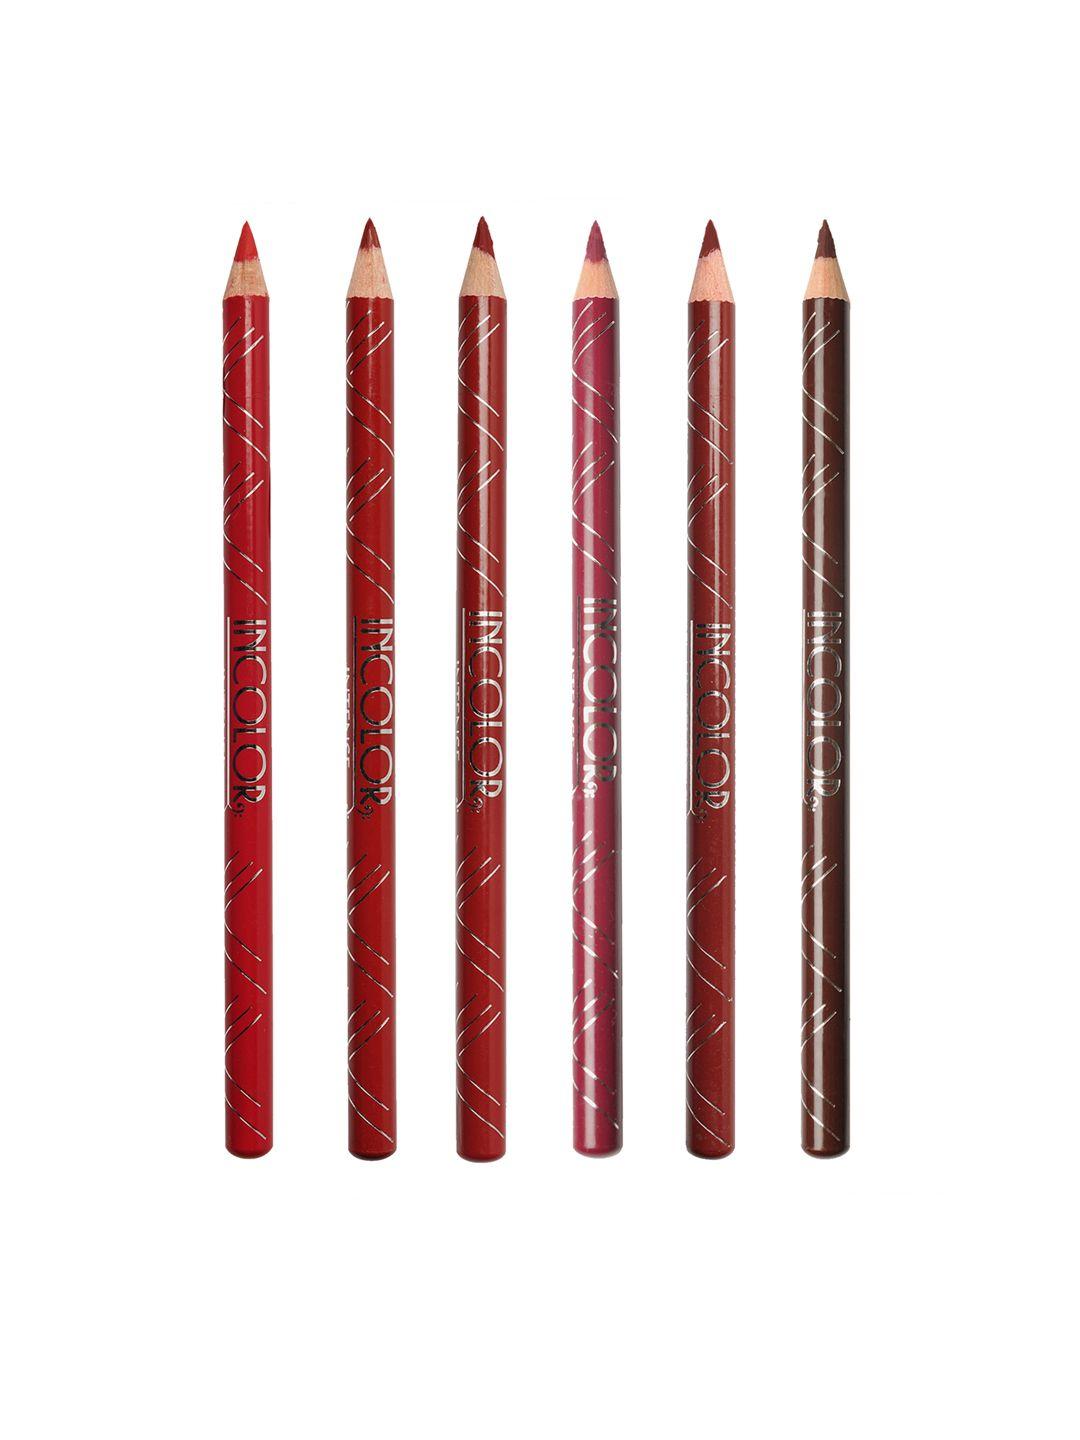 incolor pack of 6 intense longwear lip liners 1.8 g each